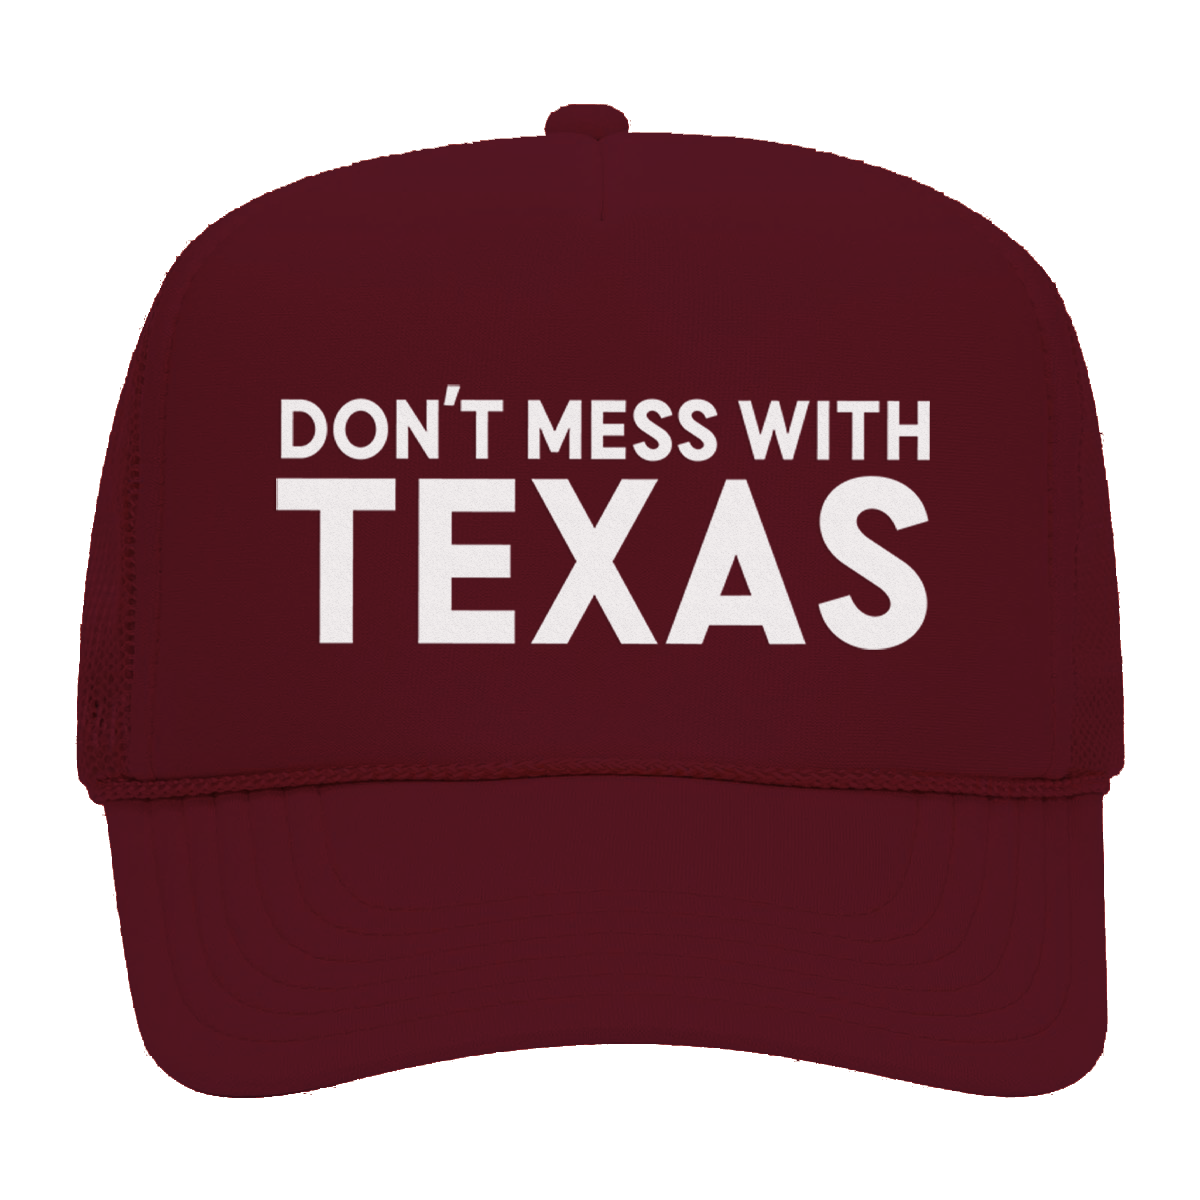 Don't Mess With Texas Foam Snapback